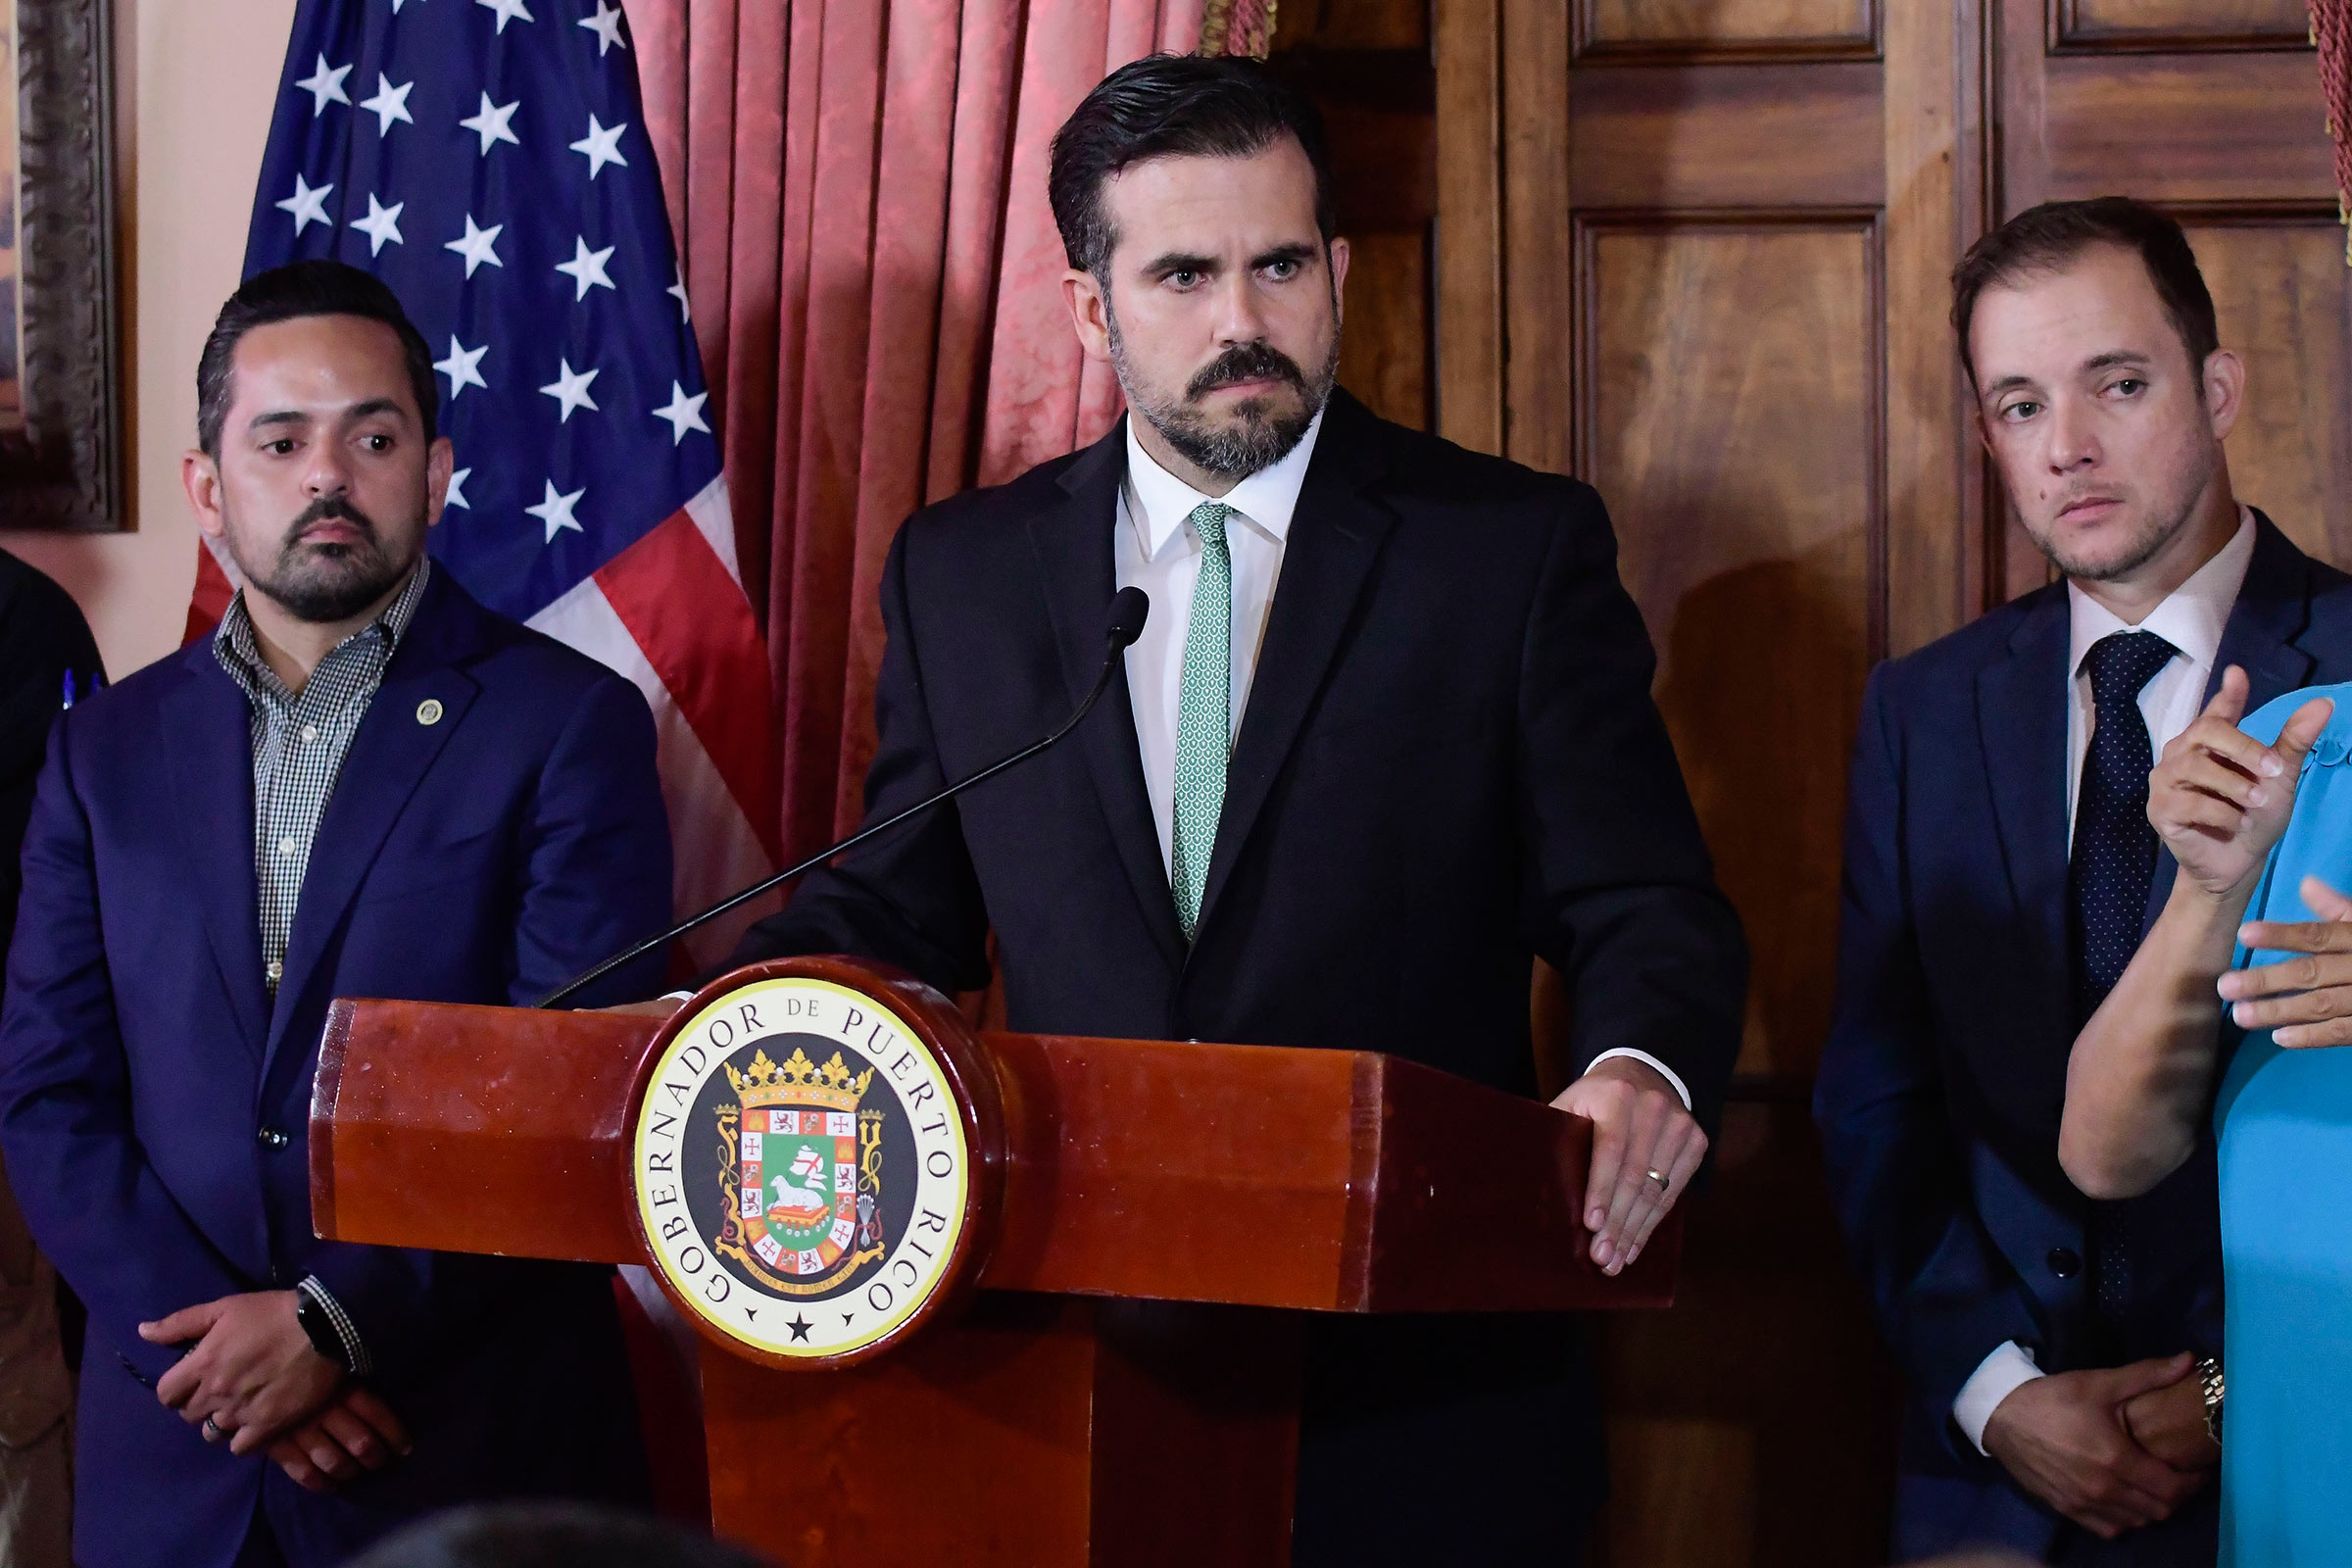 Governor Rosselló at a press conference on his administration’s scandal on July 16.